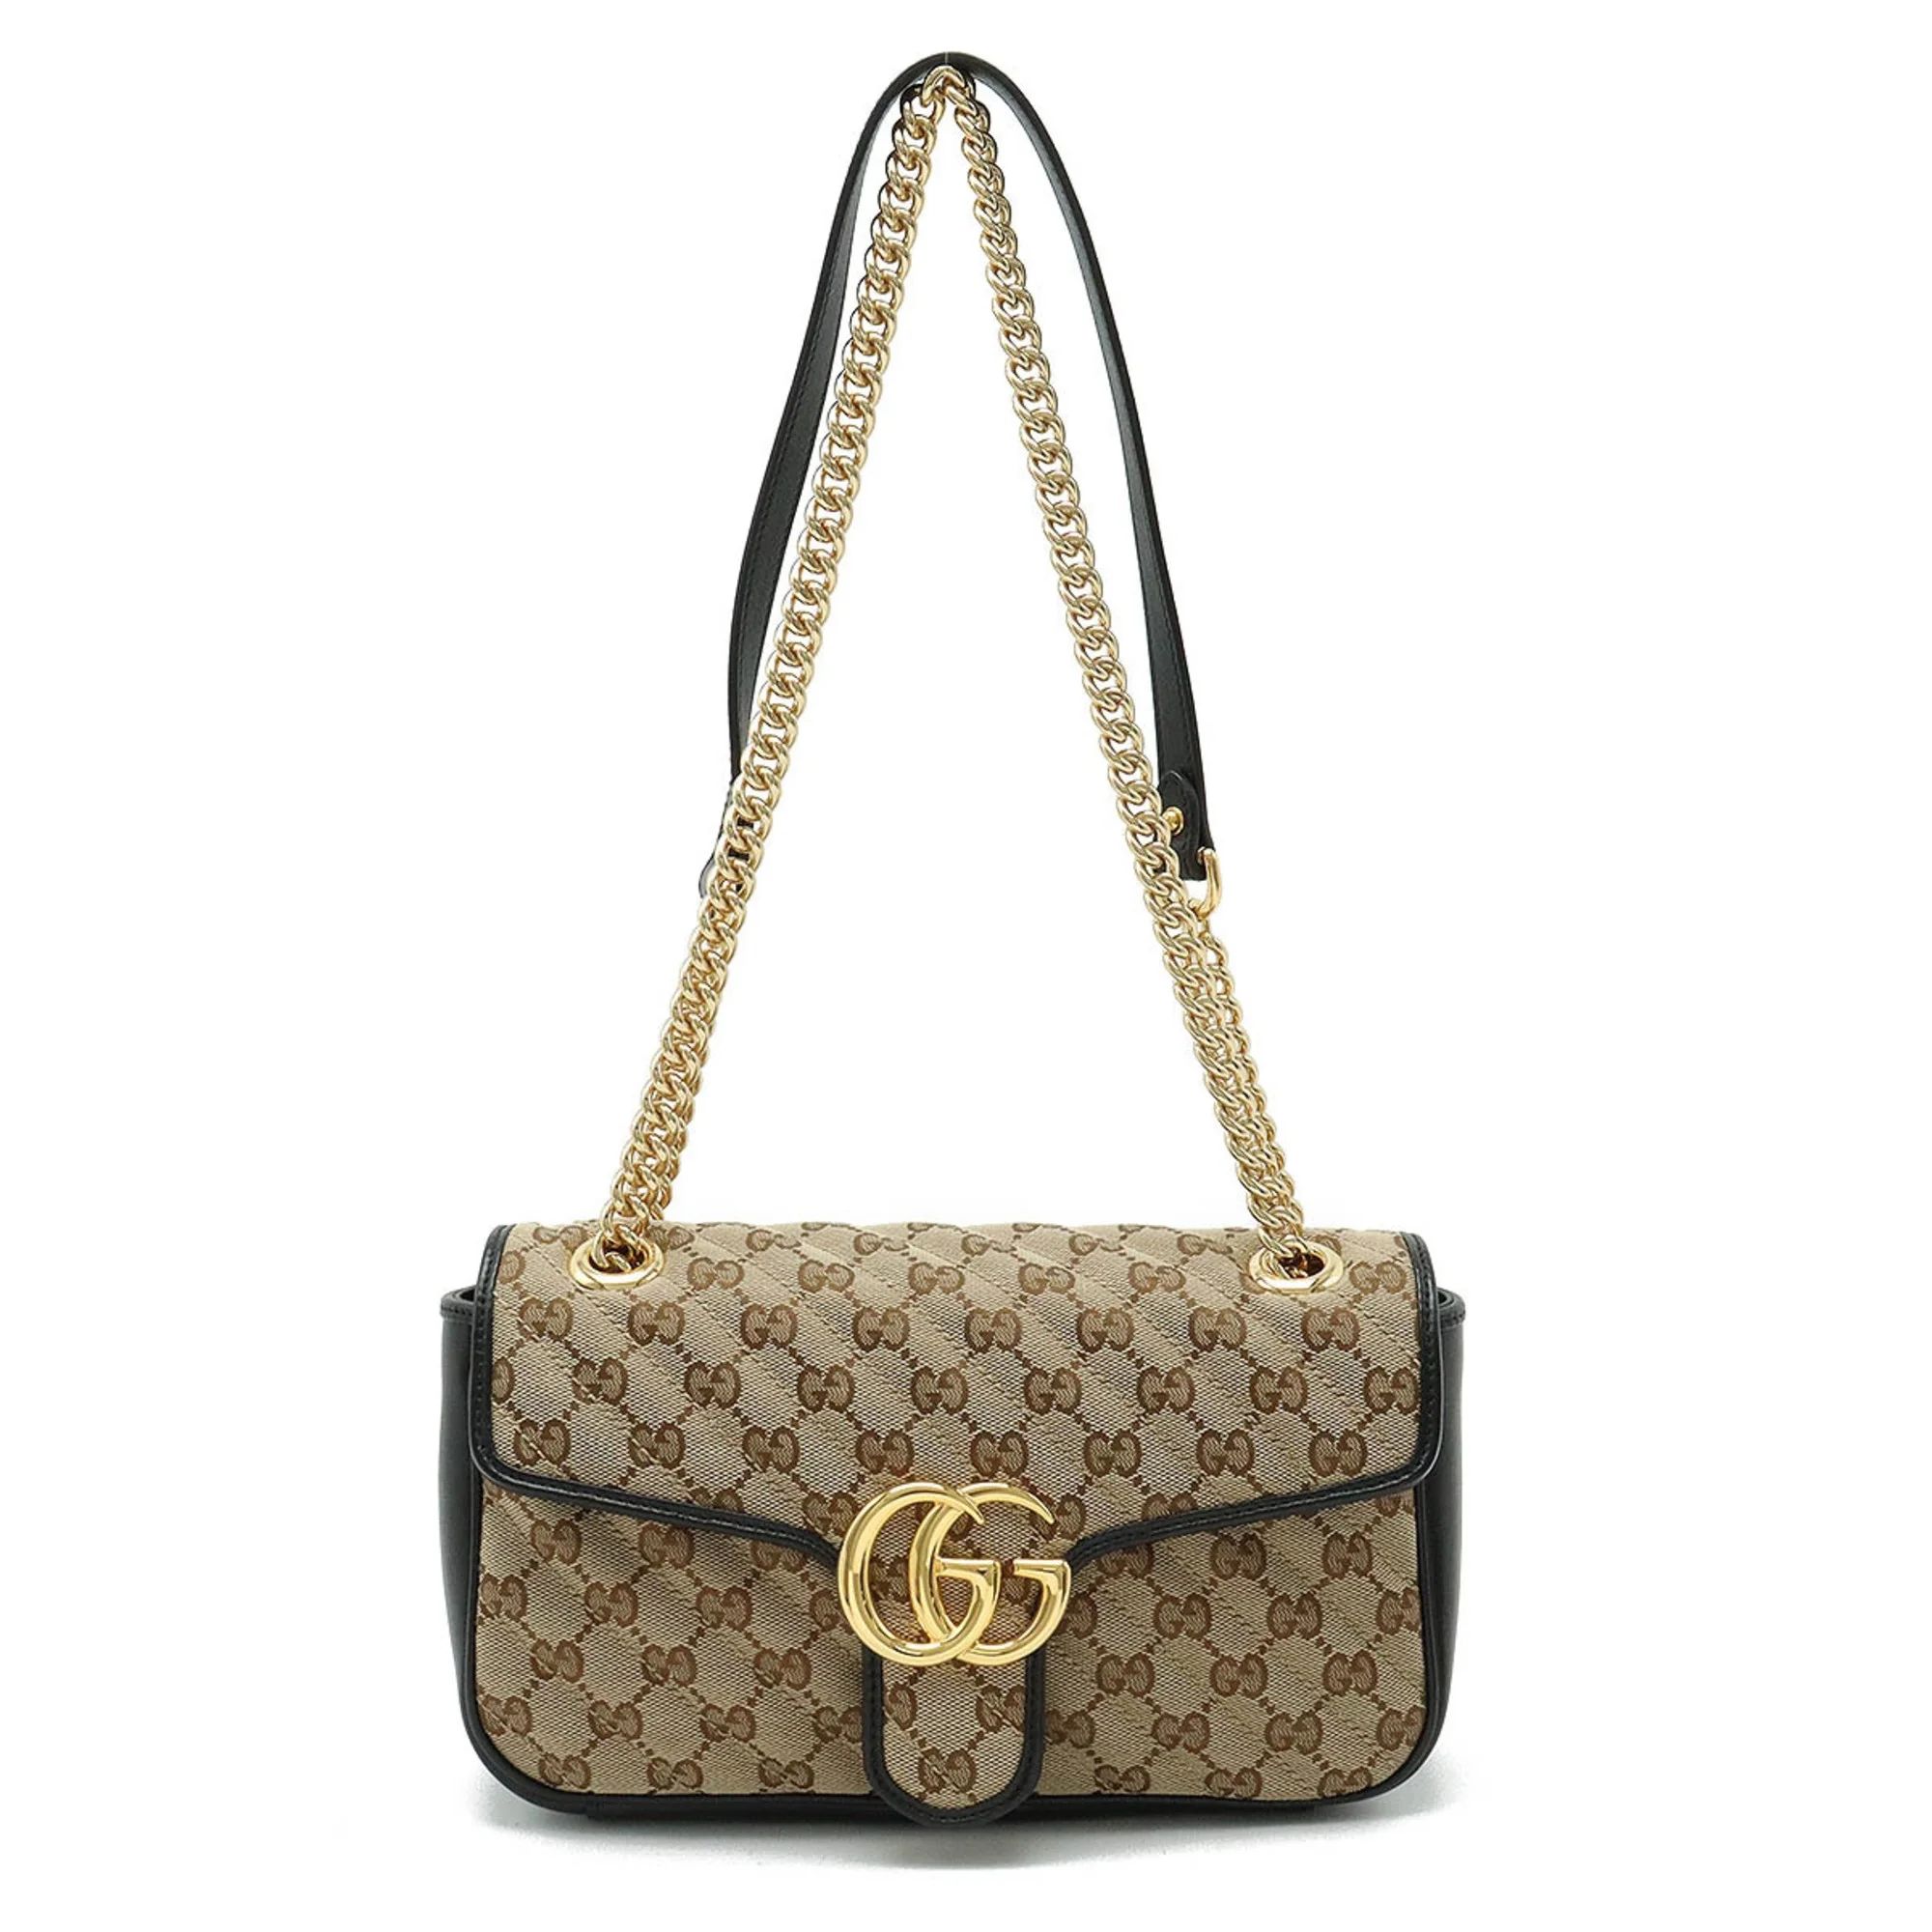 Pre-Owned GUCCI Gucci GG Marmont Small Shoulder Bag Chain Quilted Canvas Khaki Beige Black 443497... | Walmart (US)